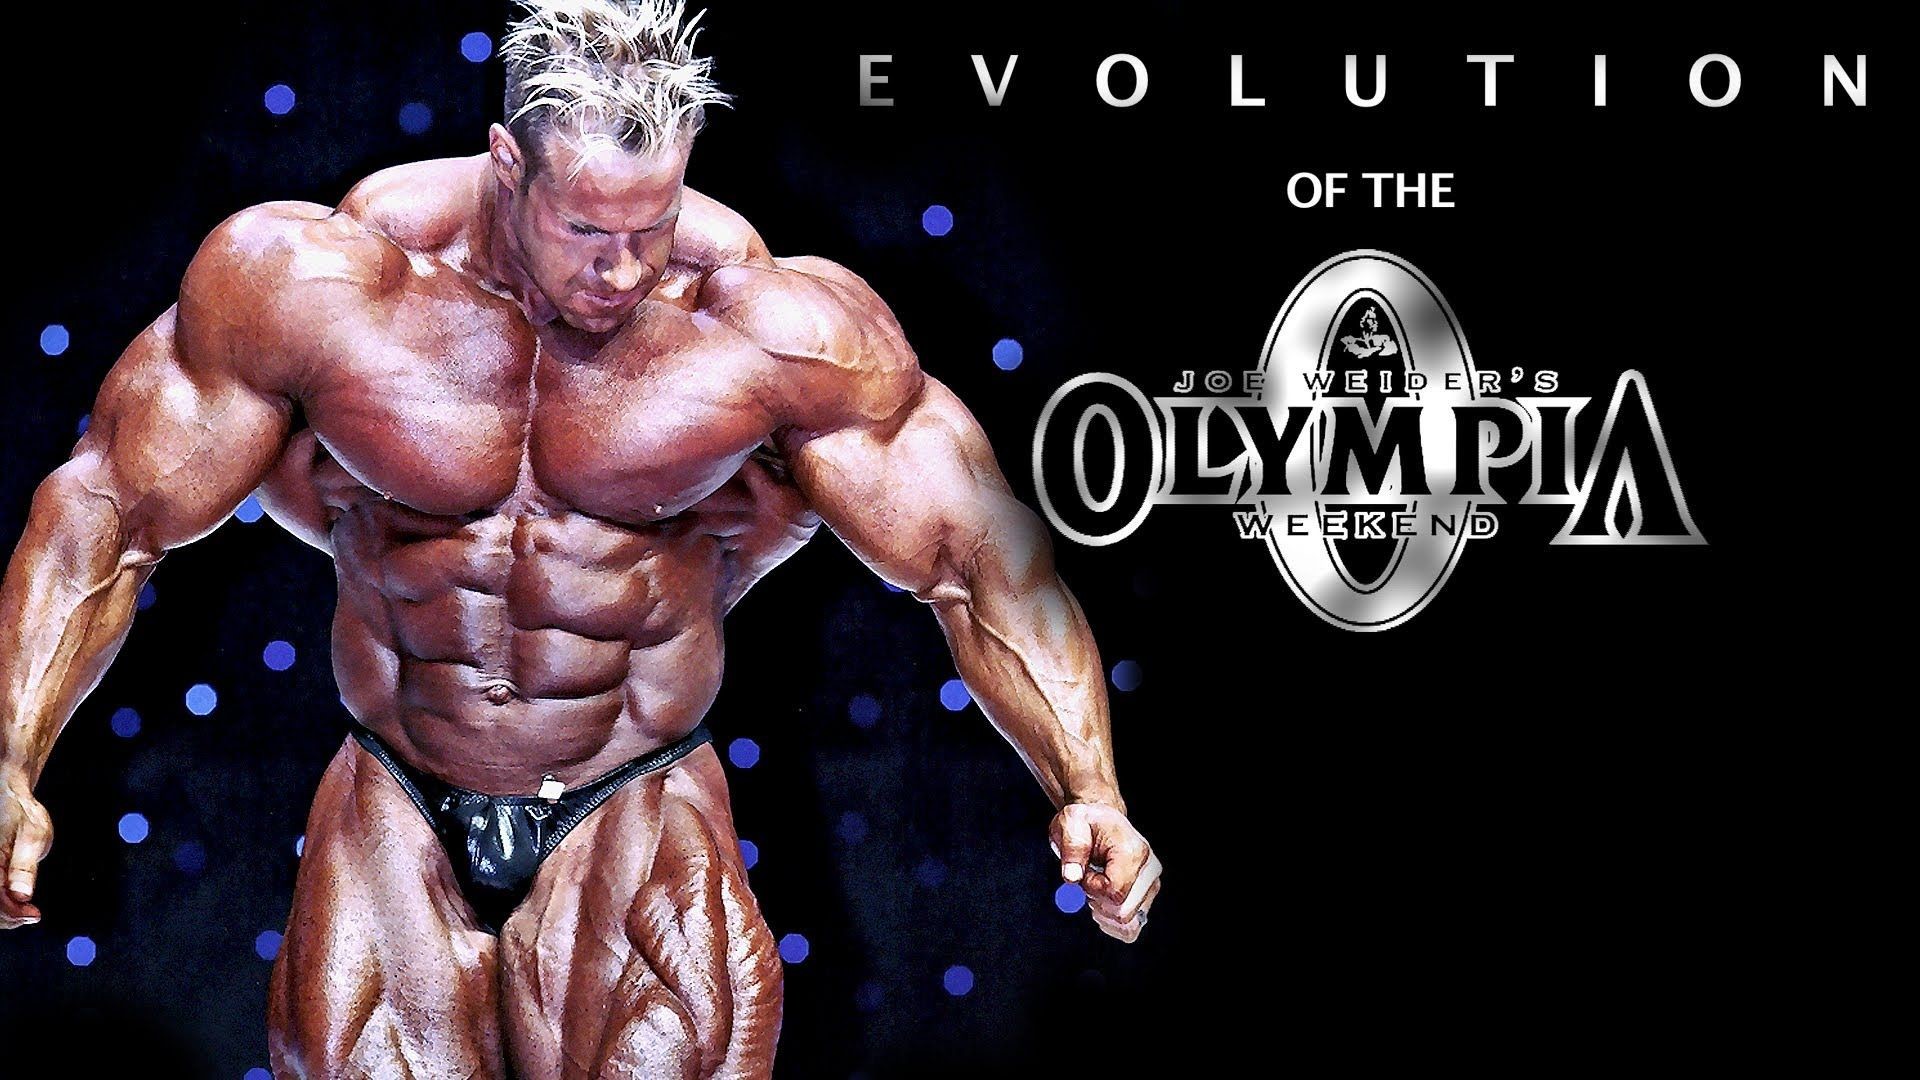 1920x1080 Mr Olympia hd photos Desktop Backgrounds Olympia wallpapers